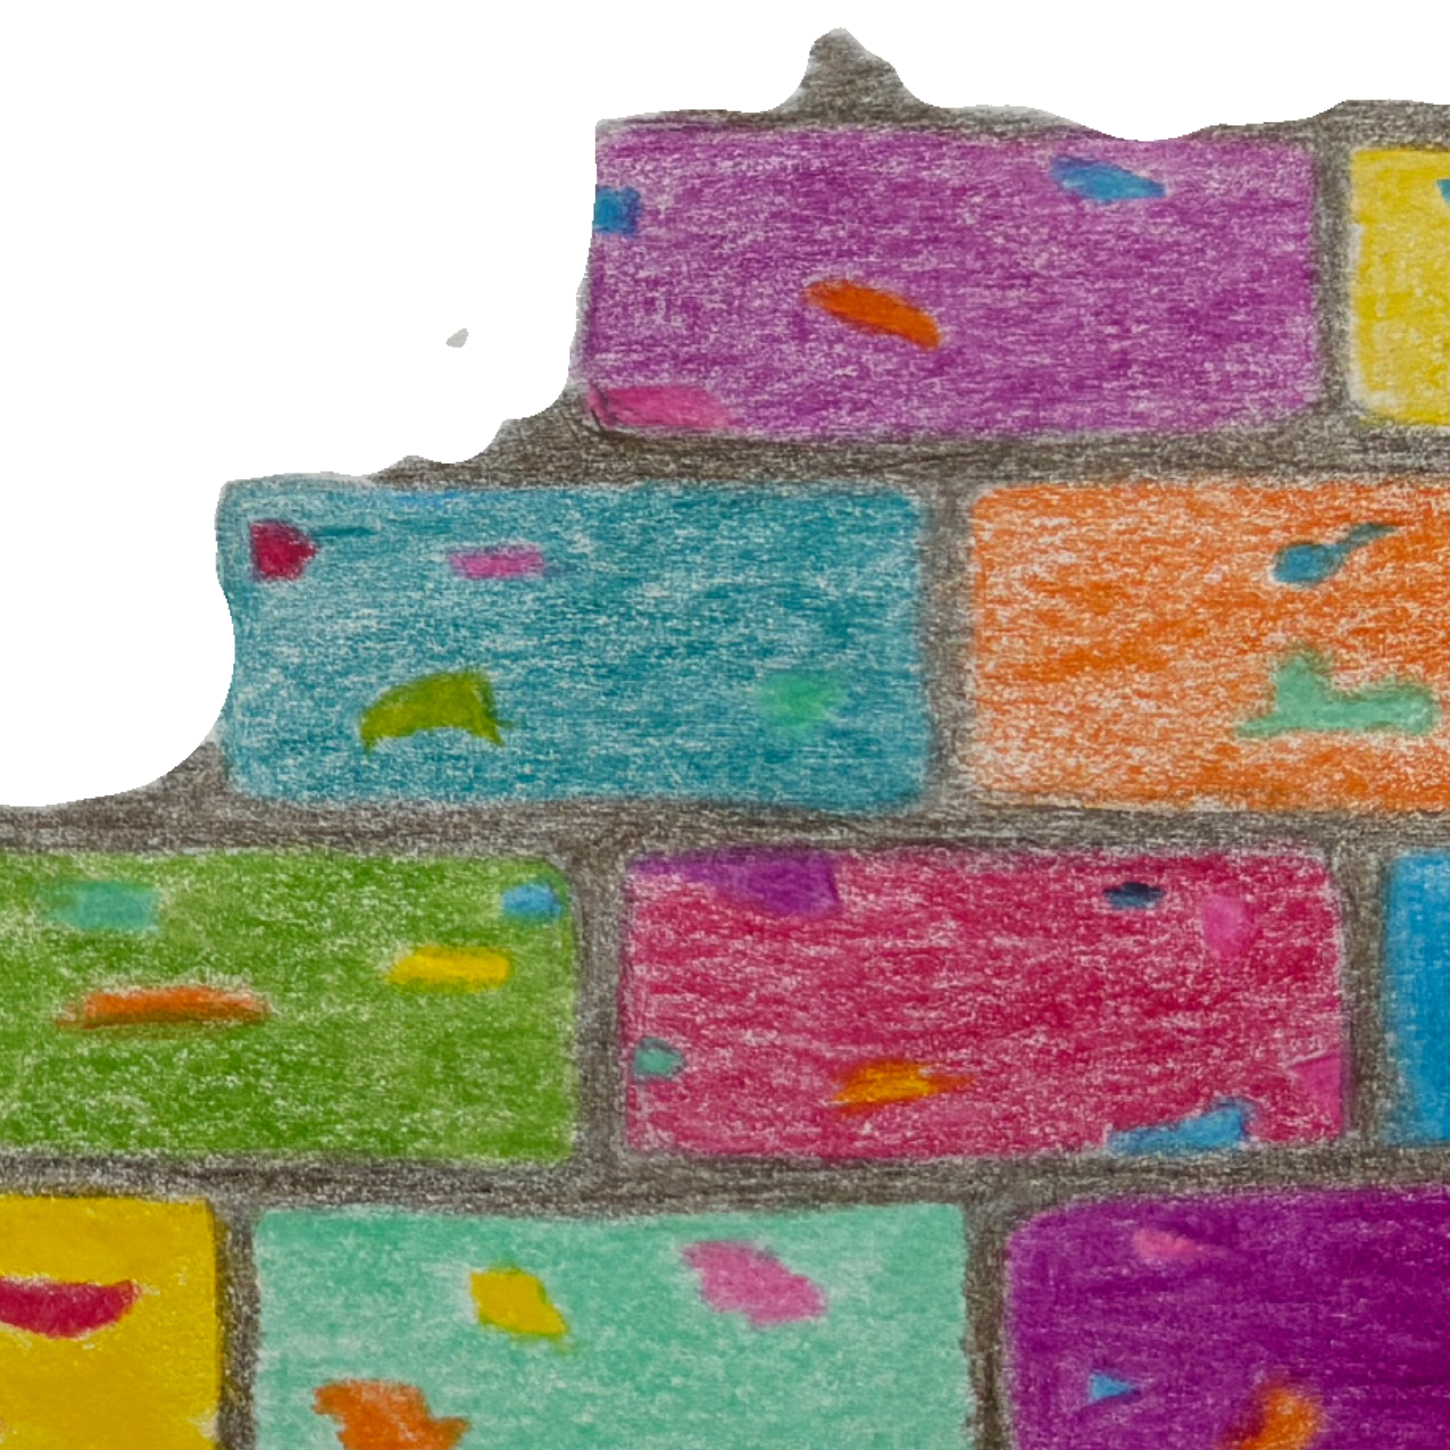 Drawing of a half-finished brick wall with brightly coloured bricks with flecks of each other's colours